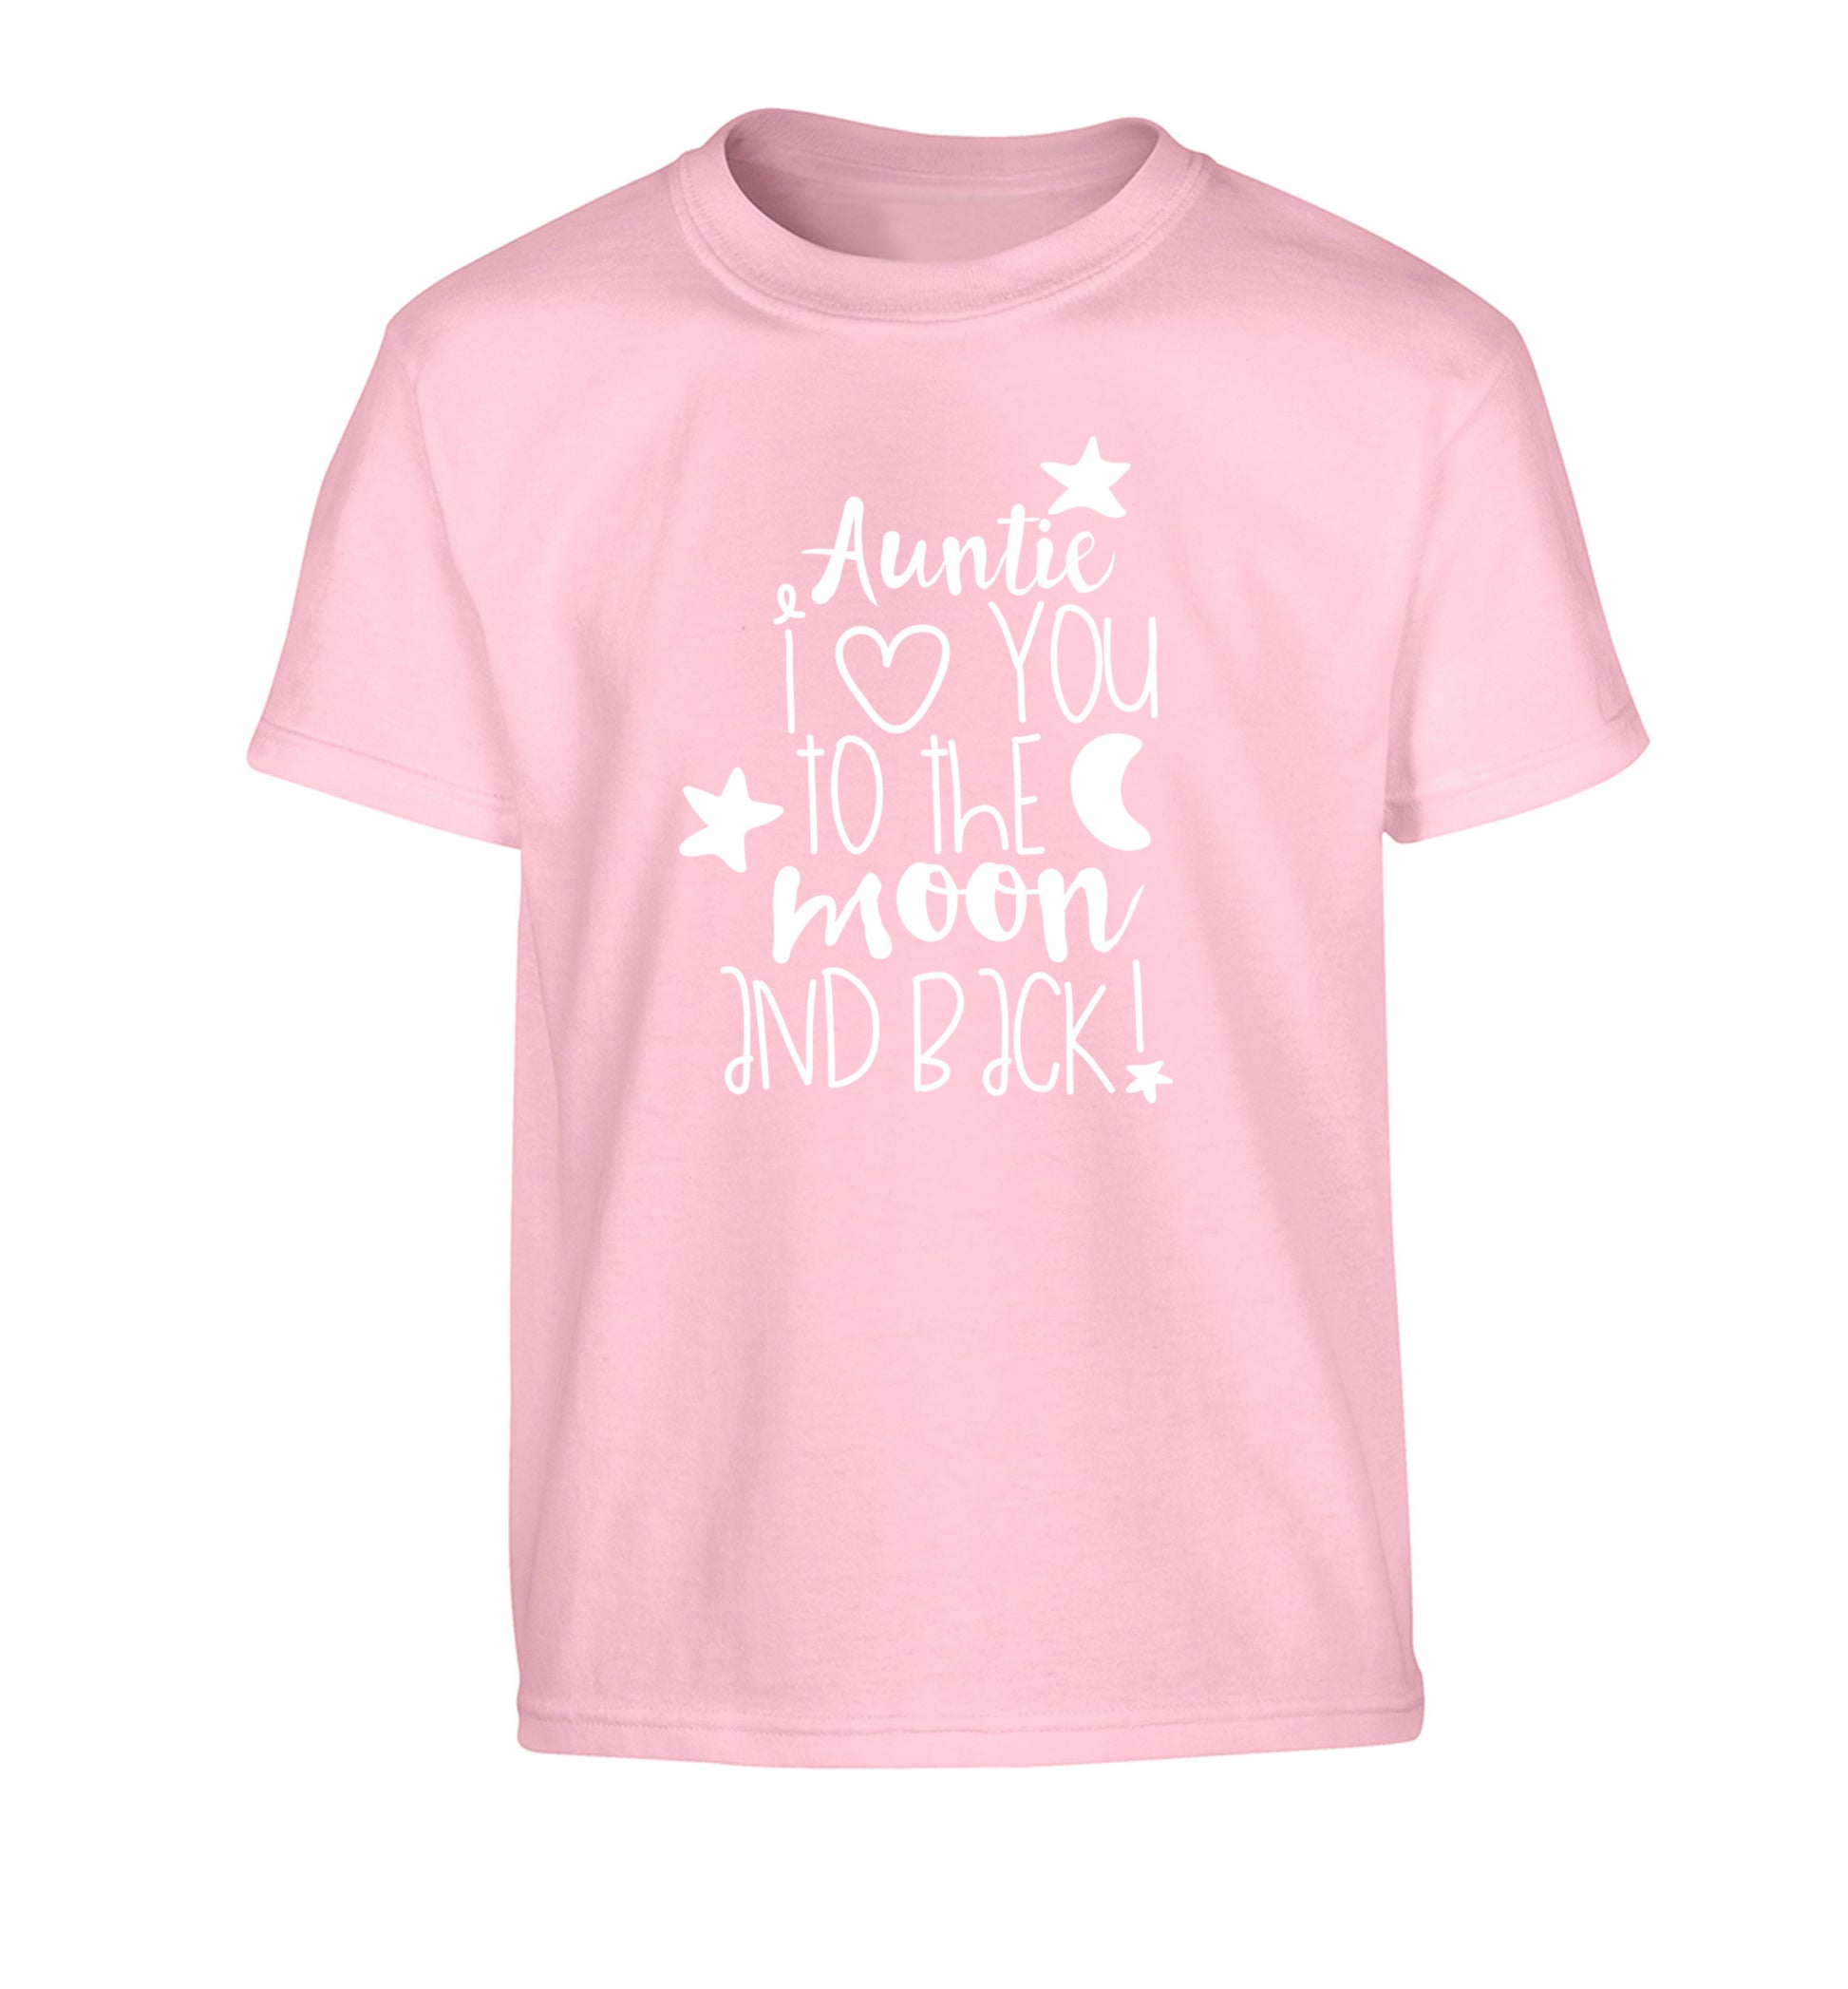 Auntie I love you to the moon and back Children's light pink Tshirt 12-14 Years